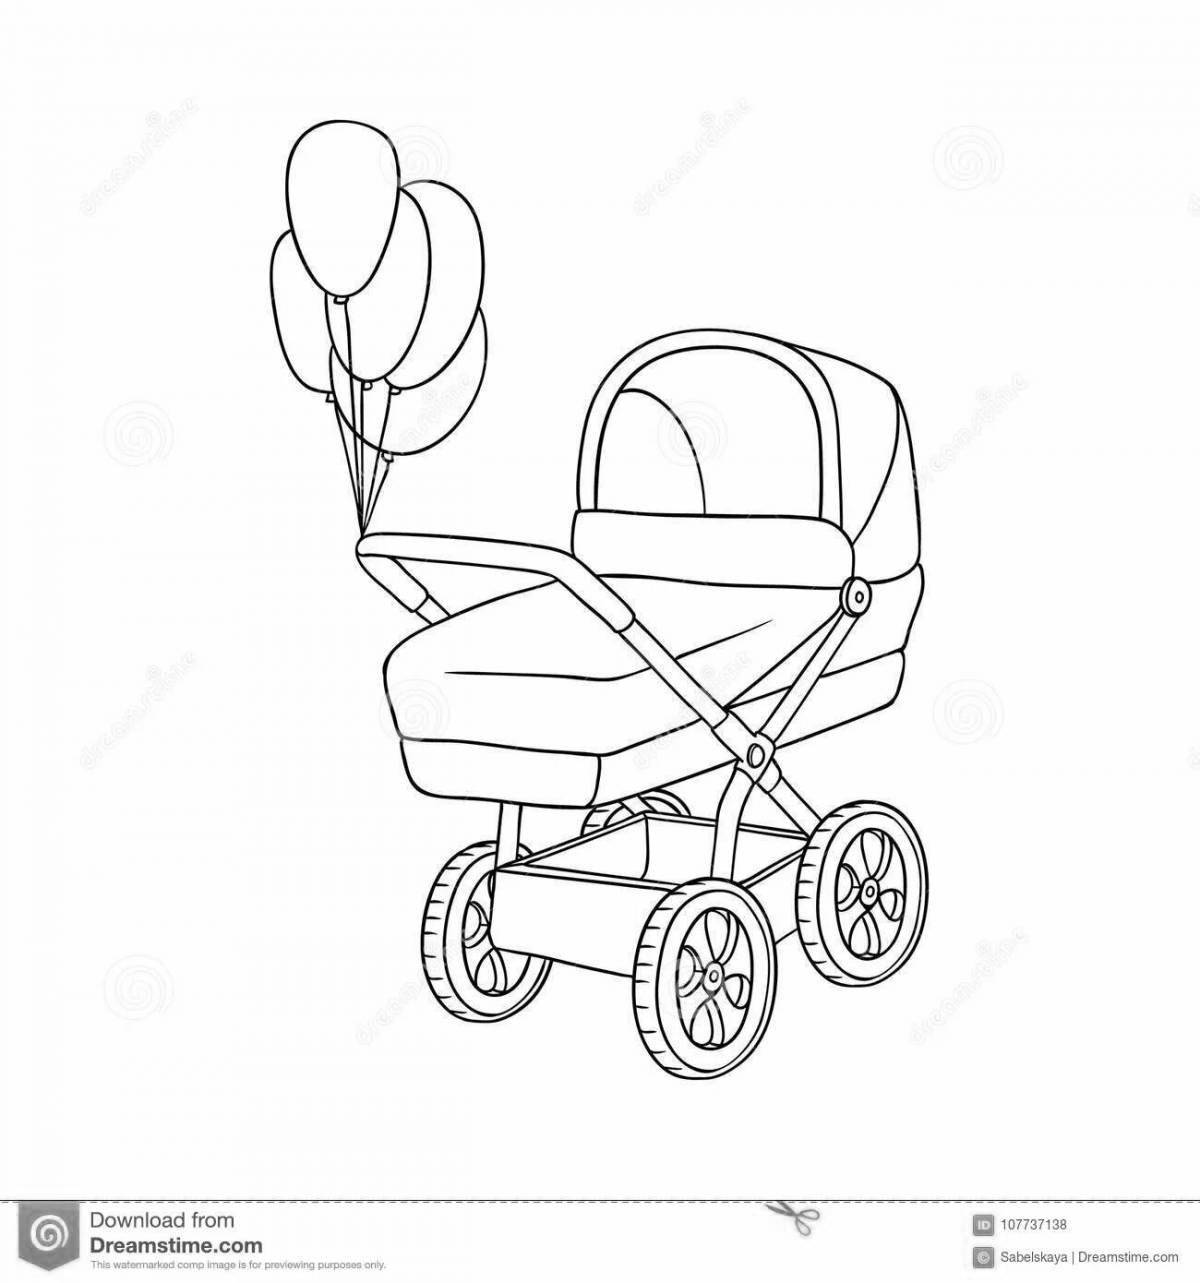 Coloring page delightful baby stroller